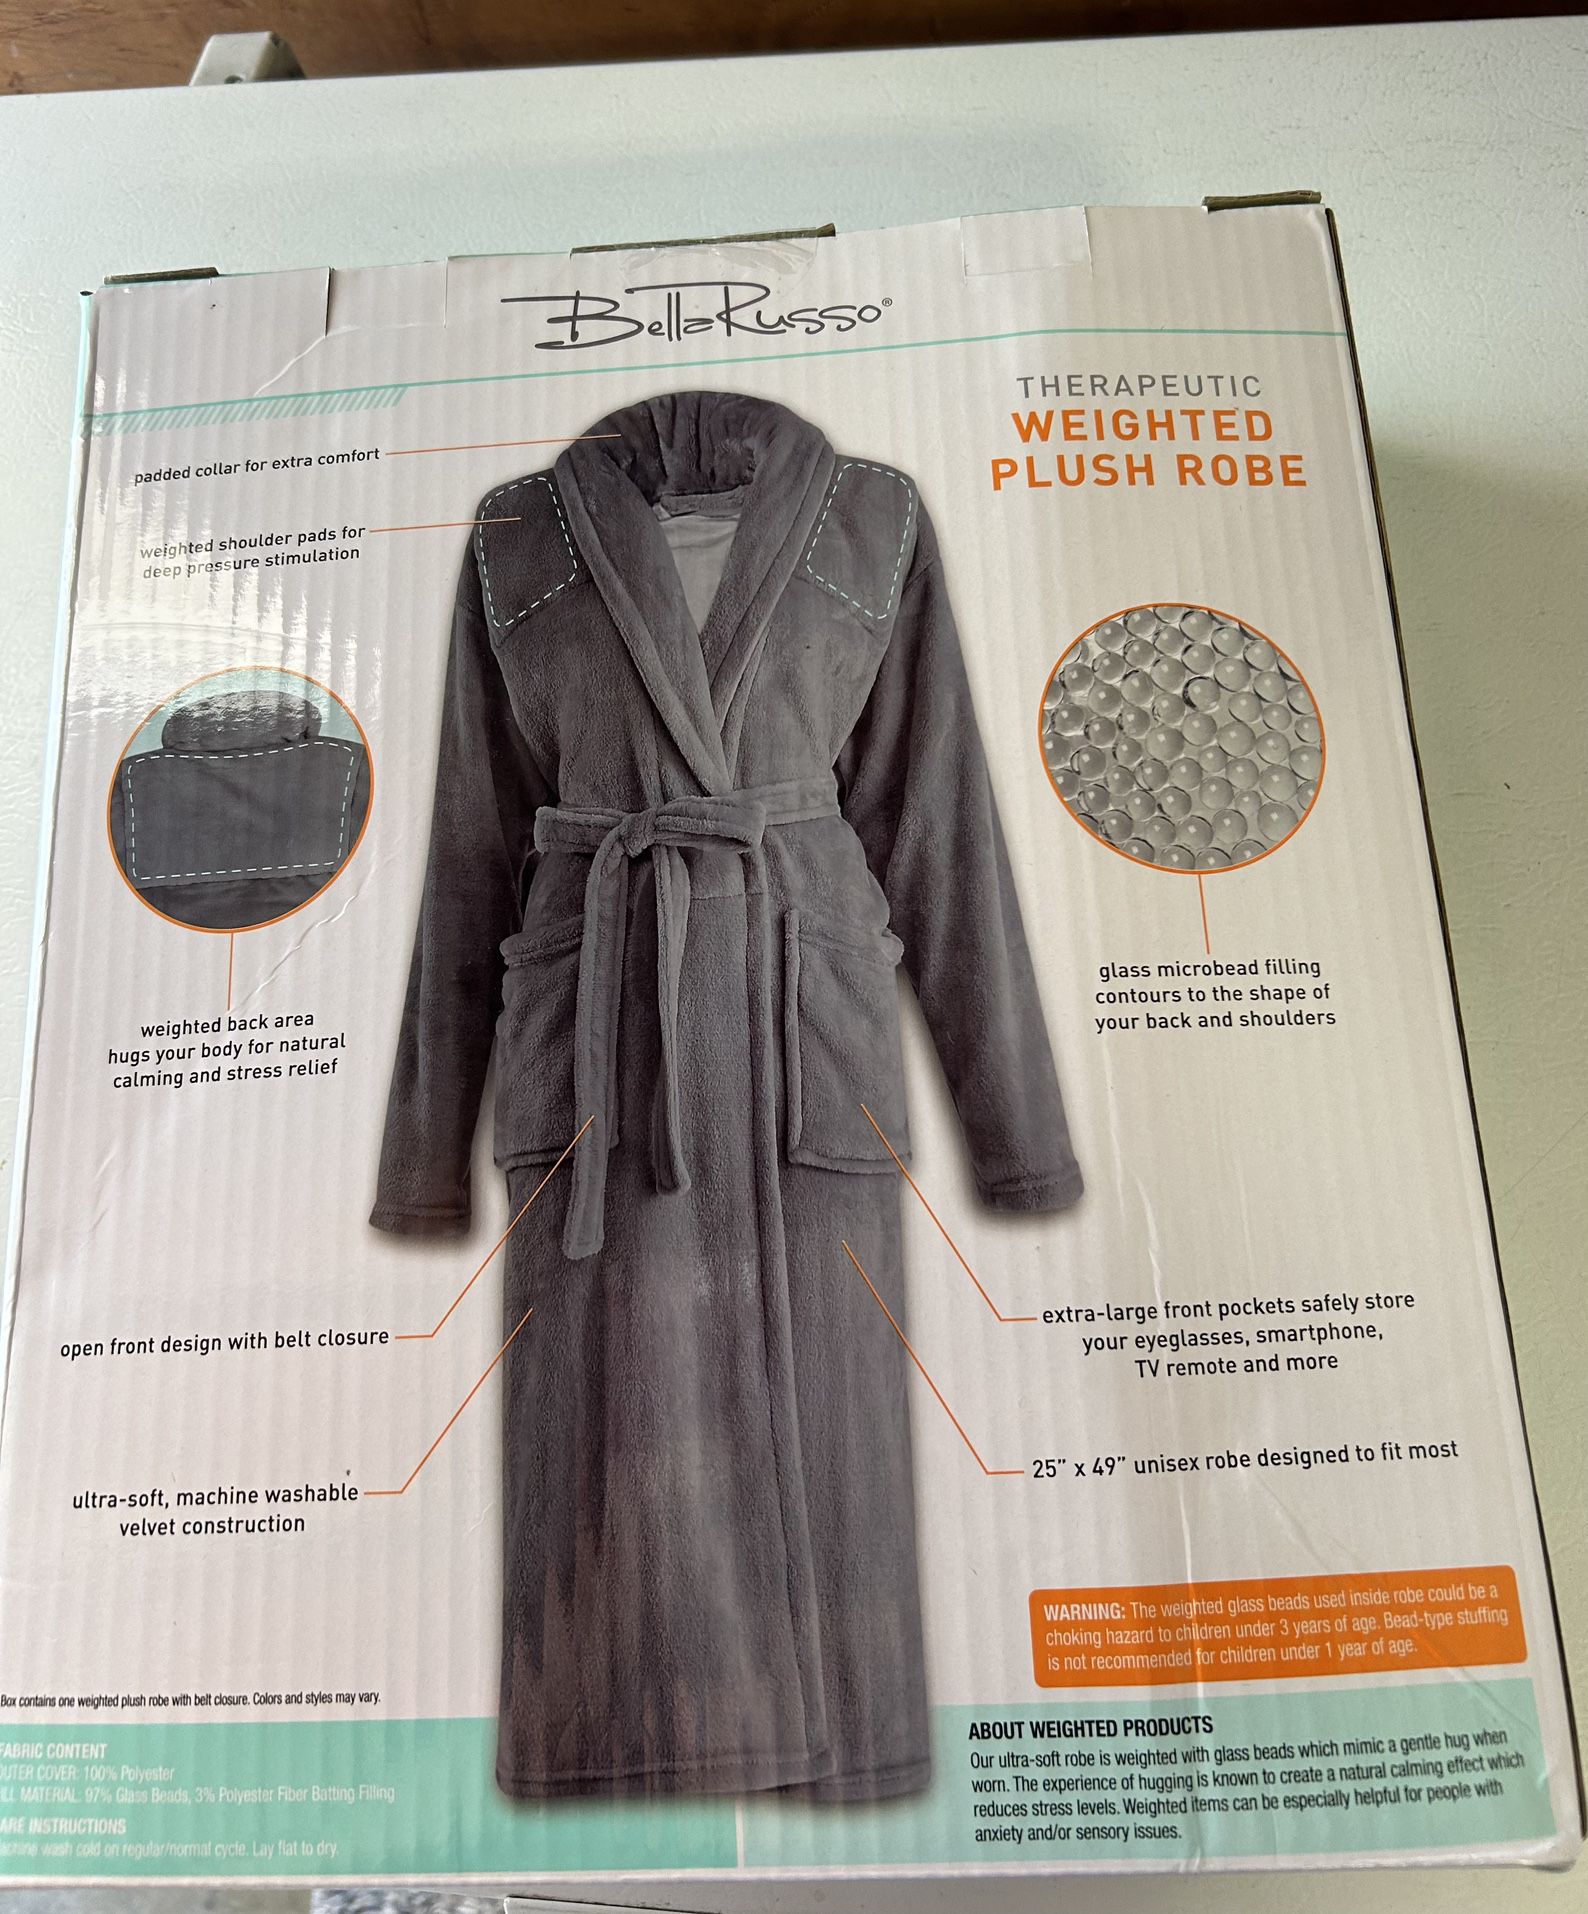 Therapeutic Weighted Plush Robe-Bella Russo